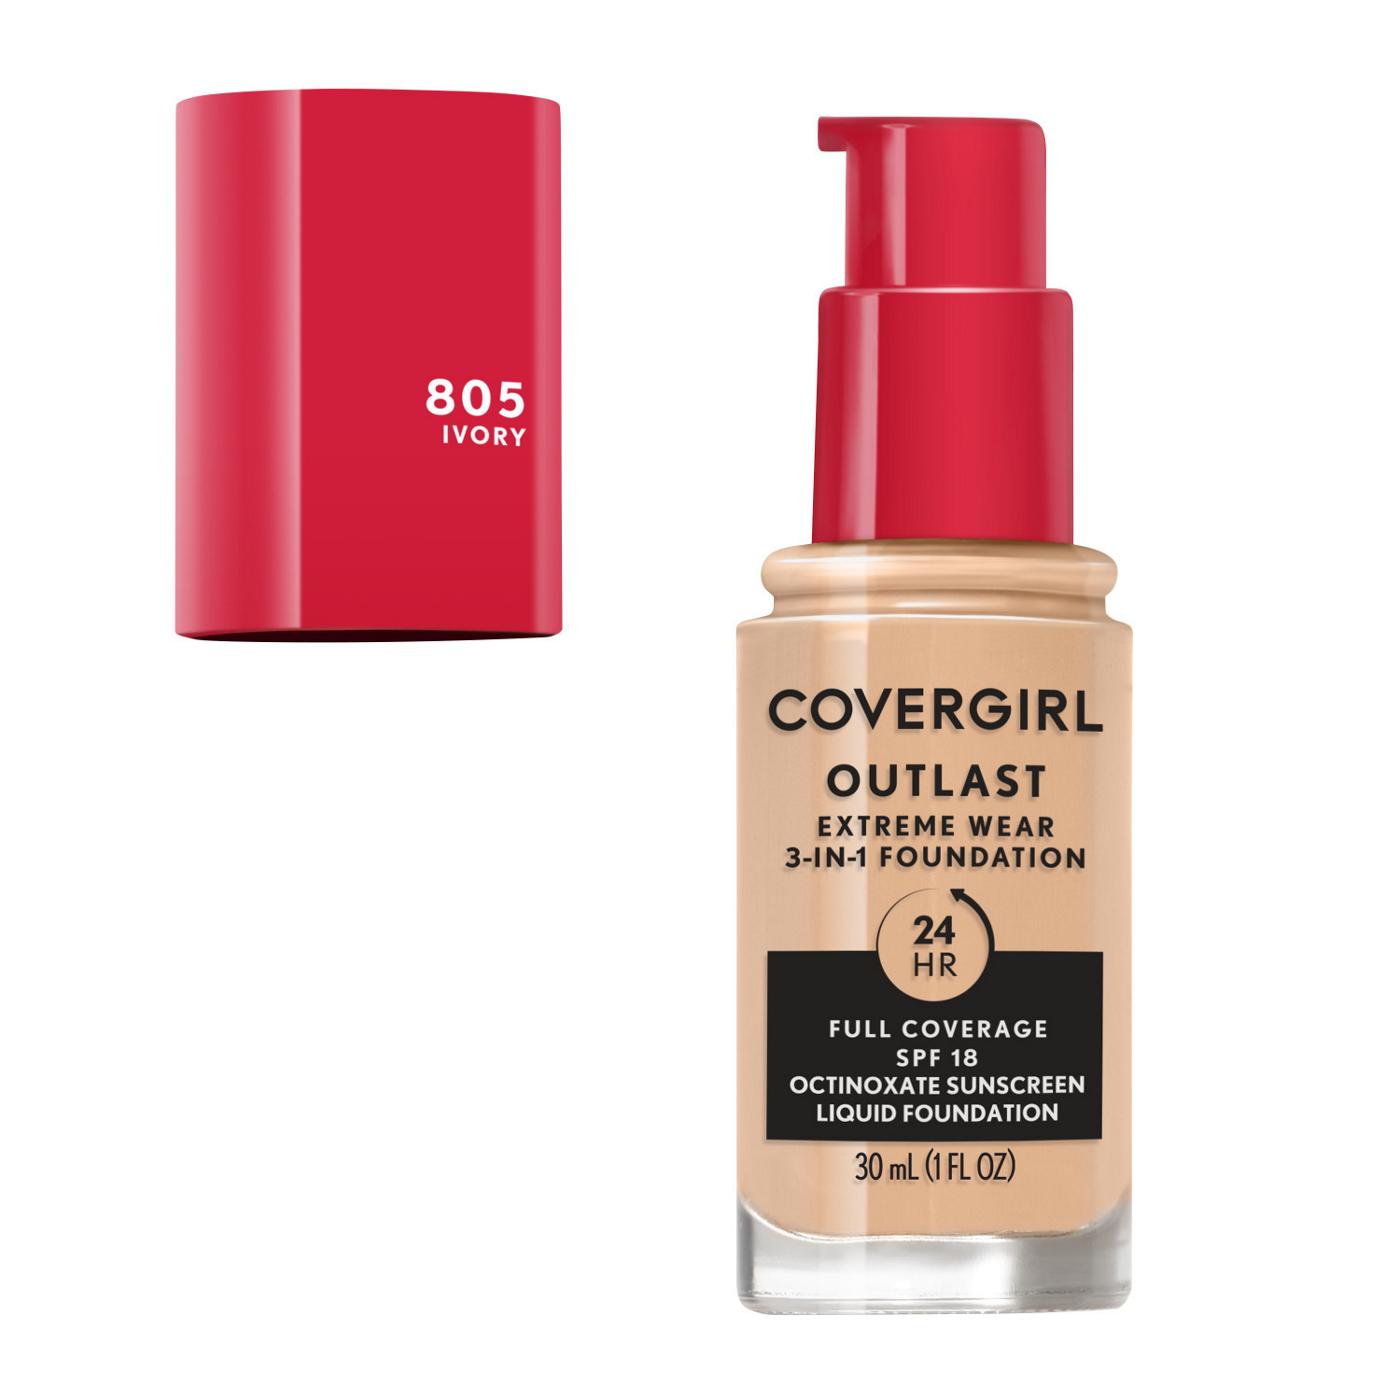 Covergirl Outlast Extreme Wear Liquid Foundation 805 Ivory; image 2 of 11